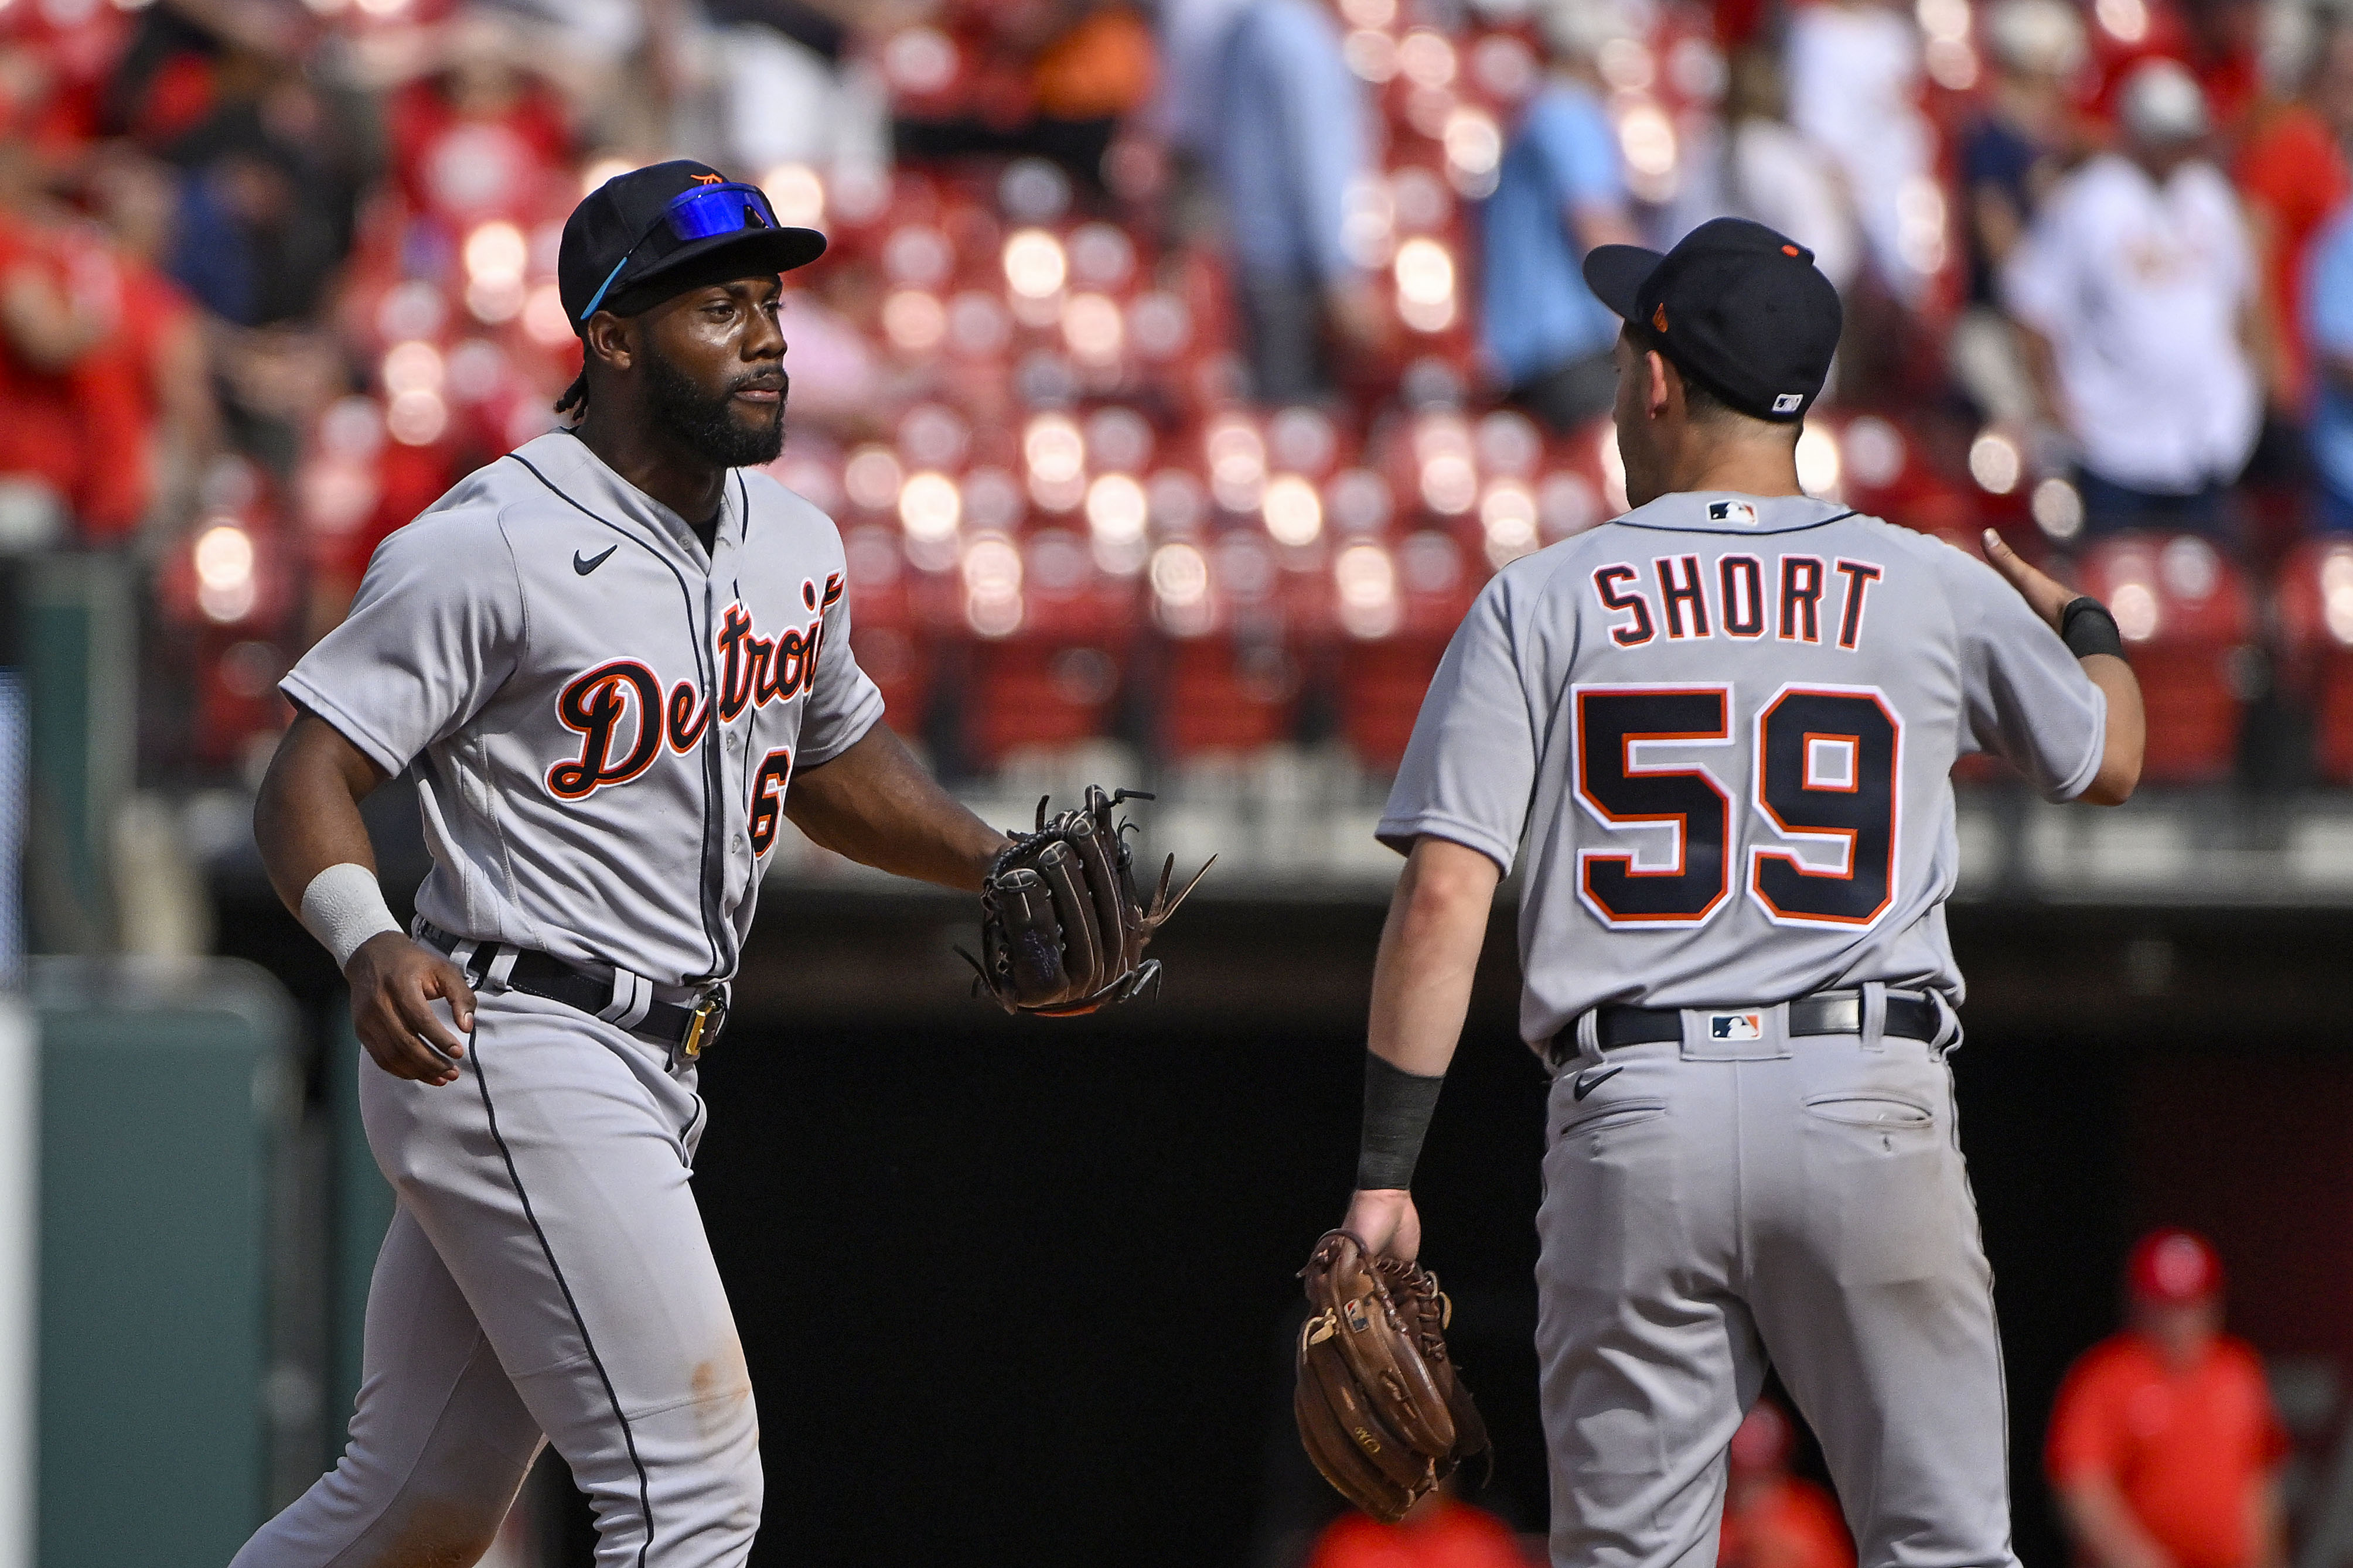 Tigers come back to beat Cardinals in 10 innings